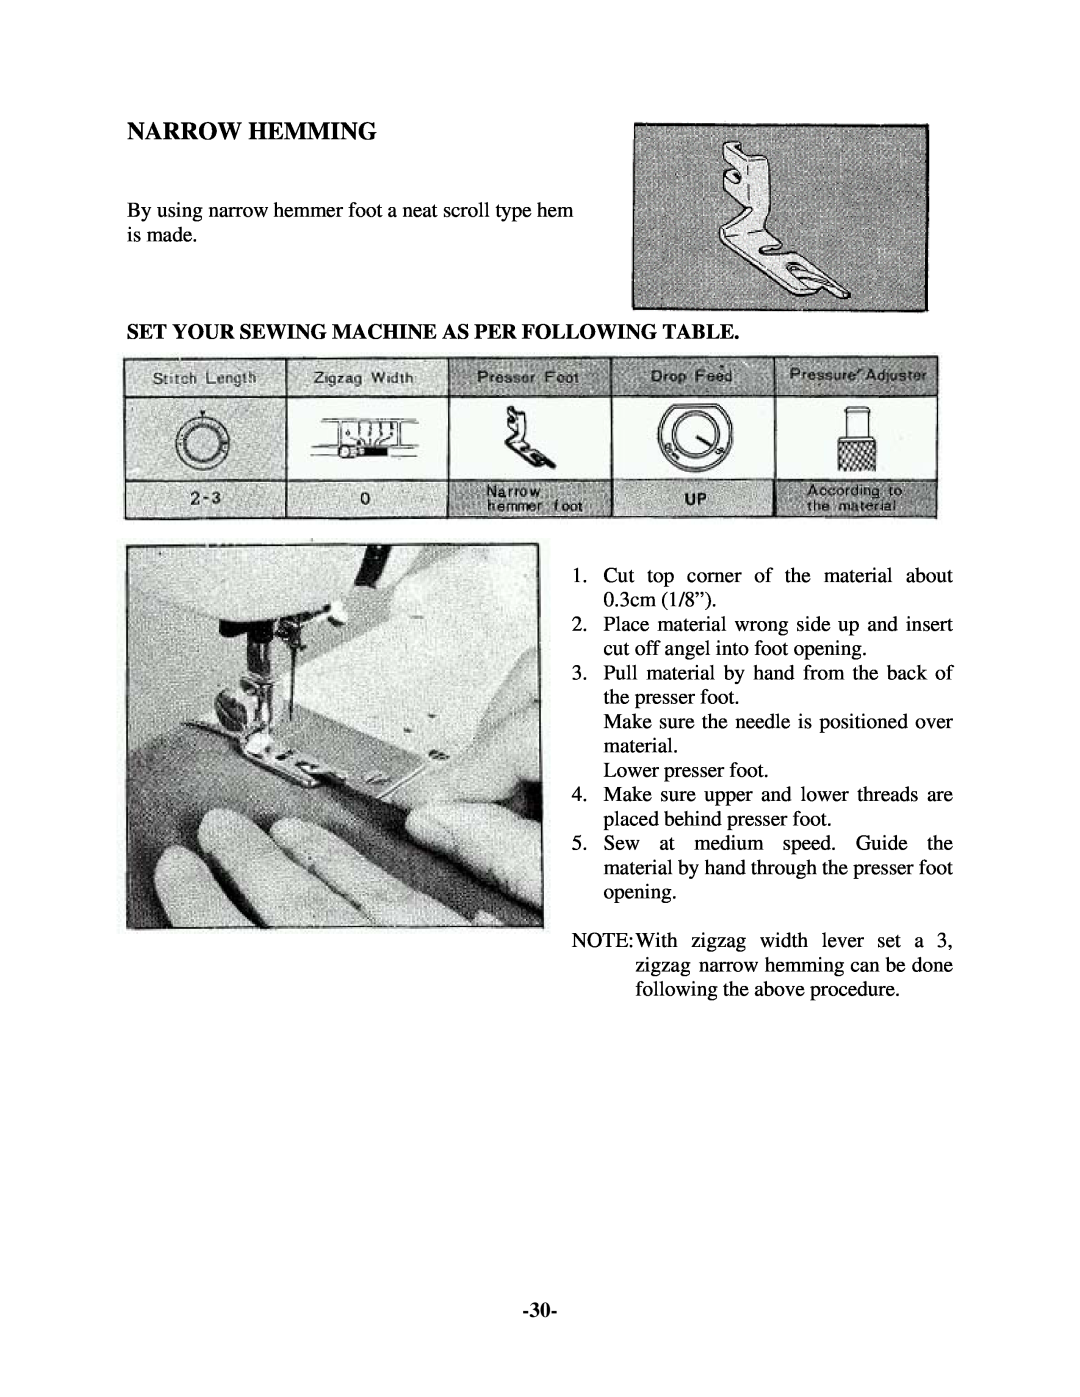 Brother 681B-UG manual Narrow Hemming, Set Your Sewing Machine As Per Following Table 